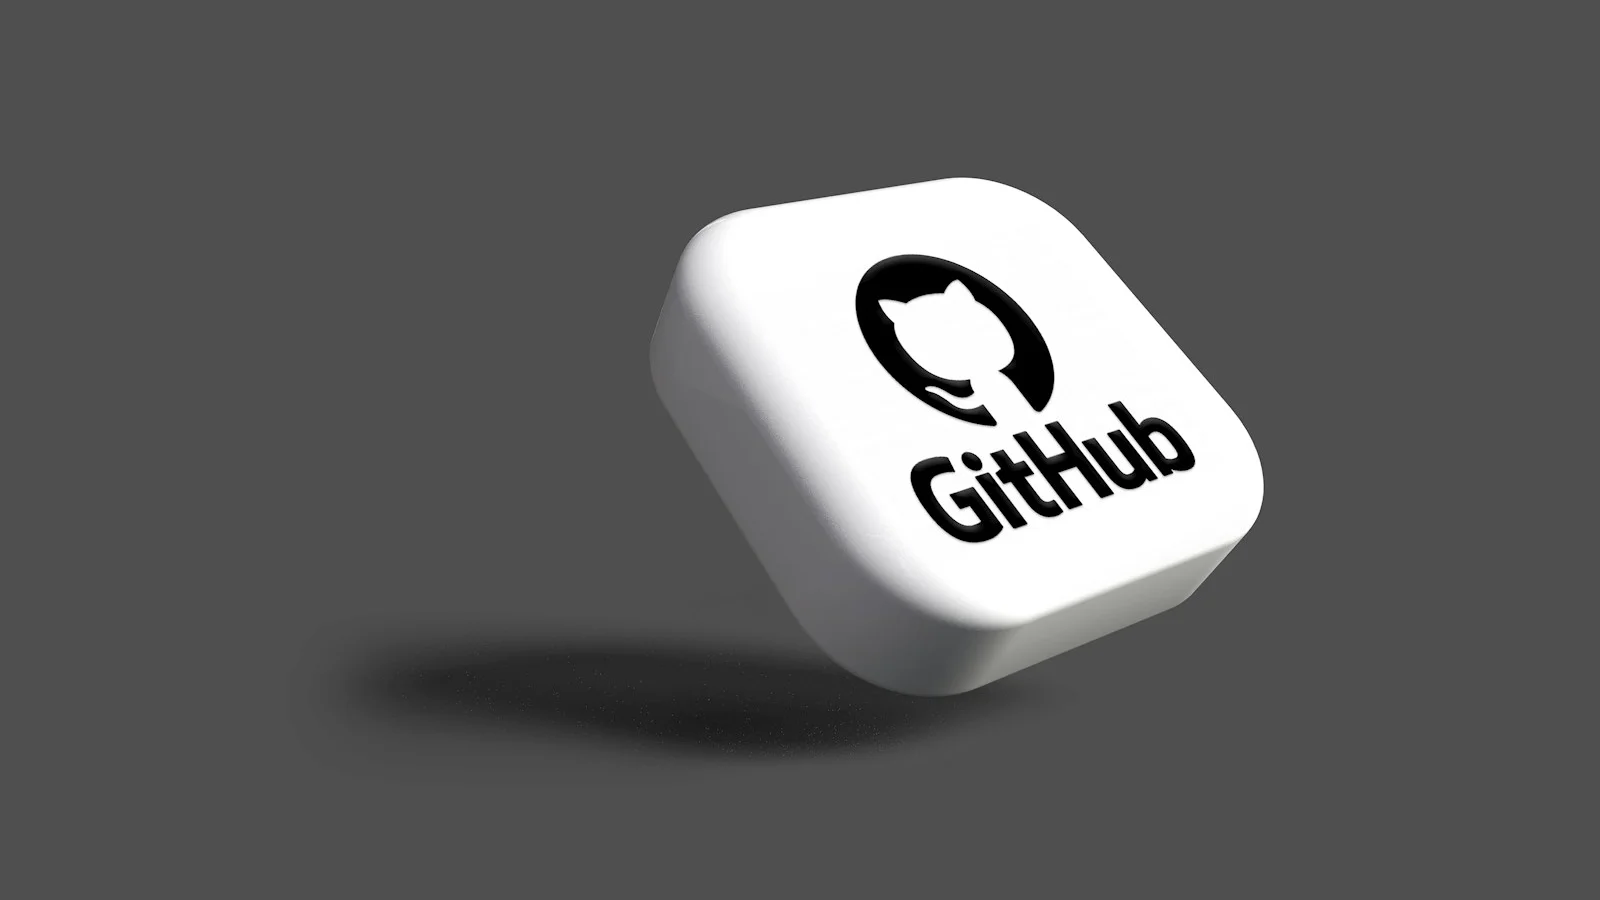 a white dice with a black github logo on it